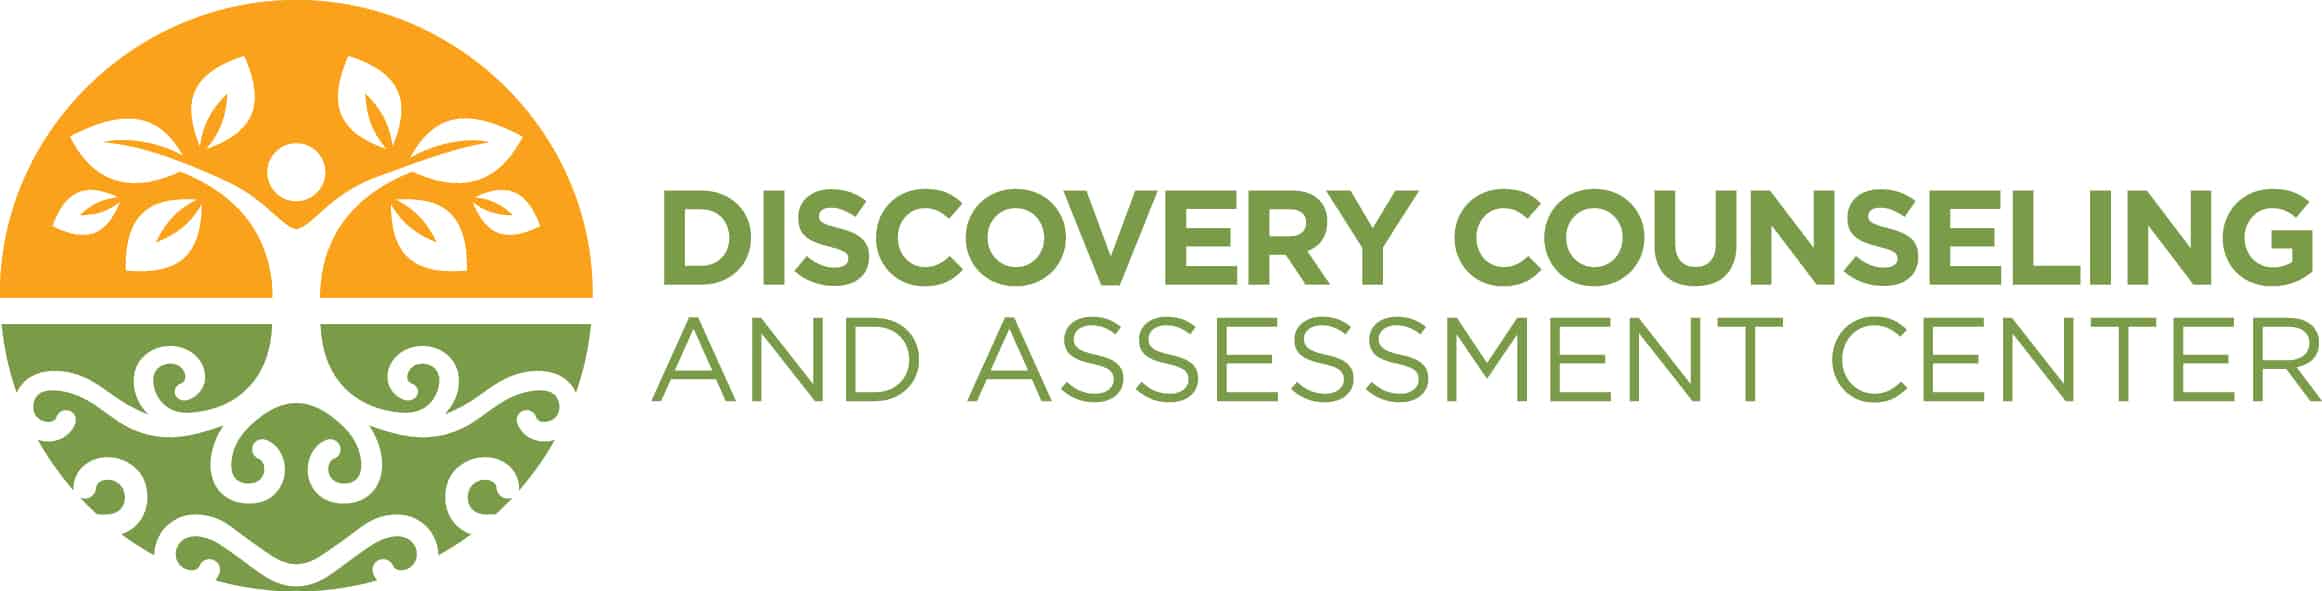 Discovery Counseling Logo Design